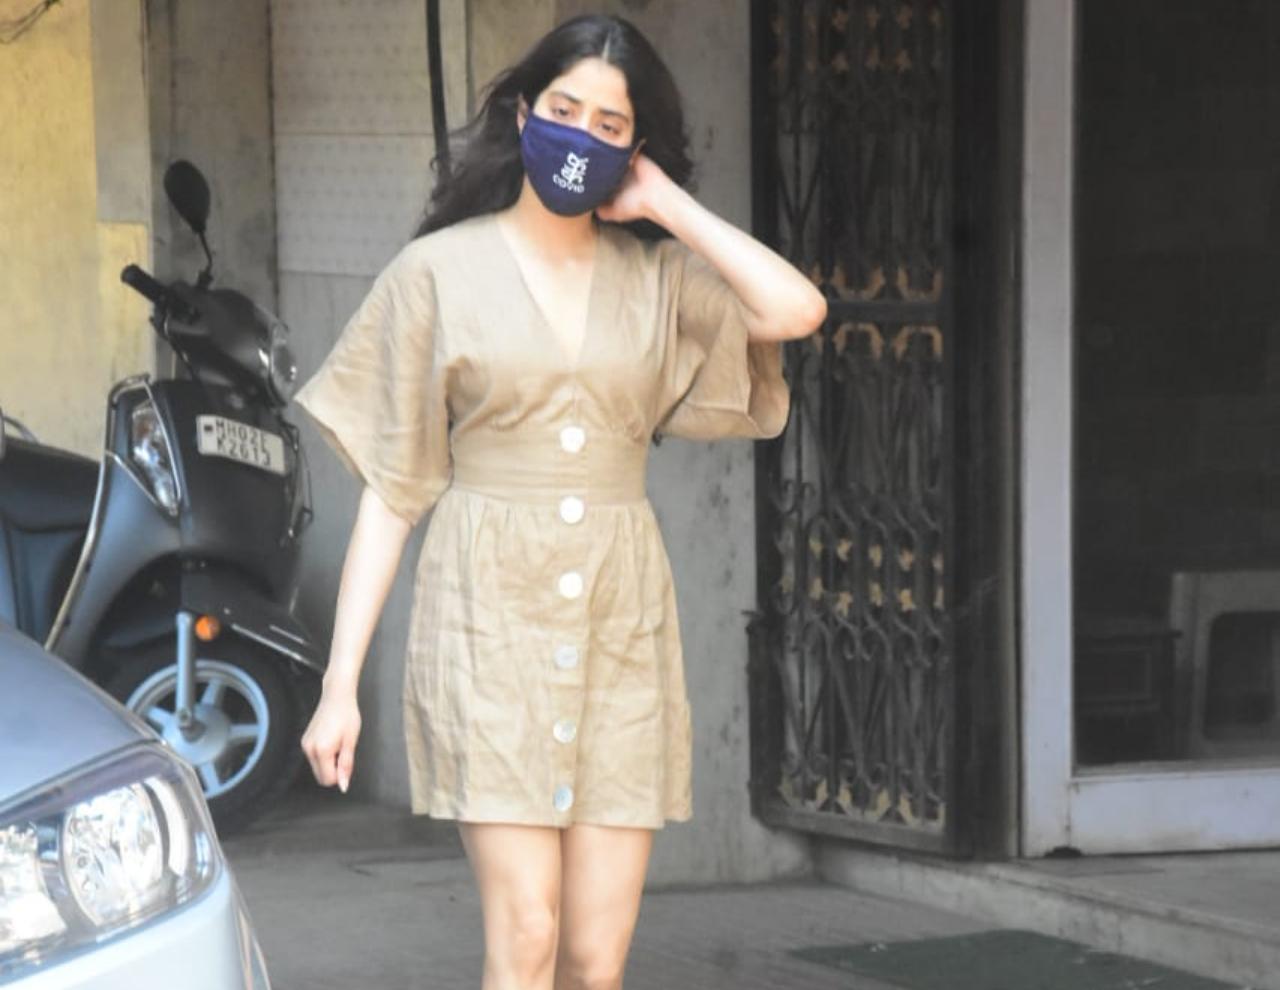 Janhvi Kapoor looked chic in her brown dress that showed off her toned legs. She kept her hair open and wore a blue mask to prevent the spread of COVID-19.